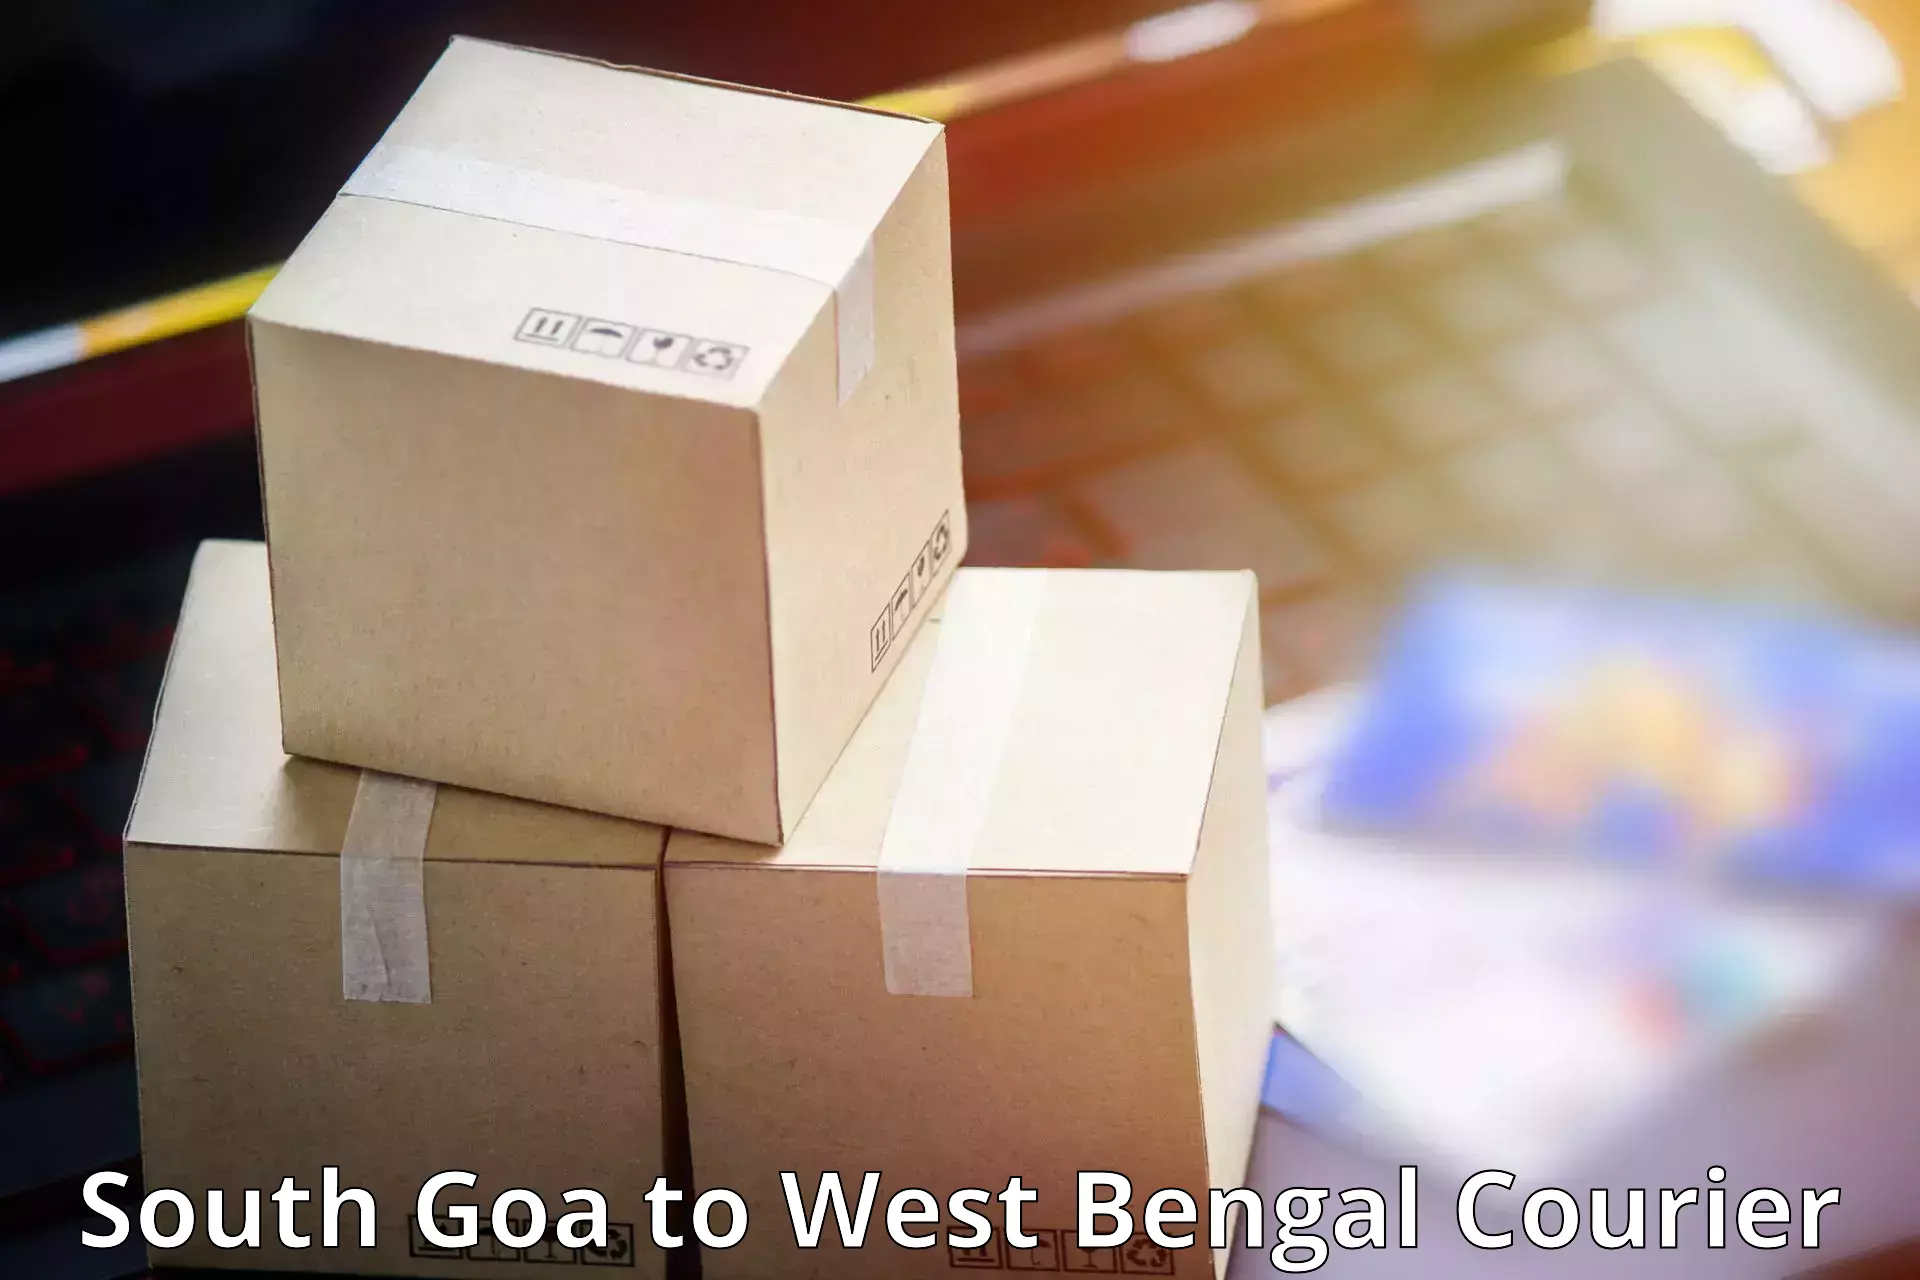 Global courier networks South Goa to Rampurhat